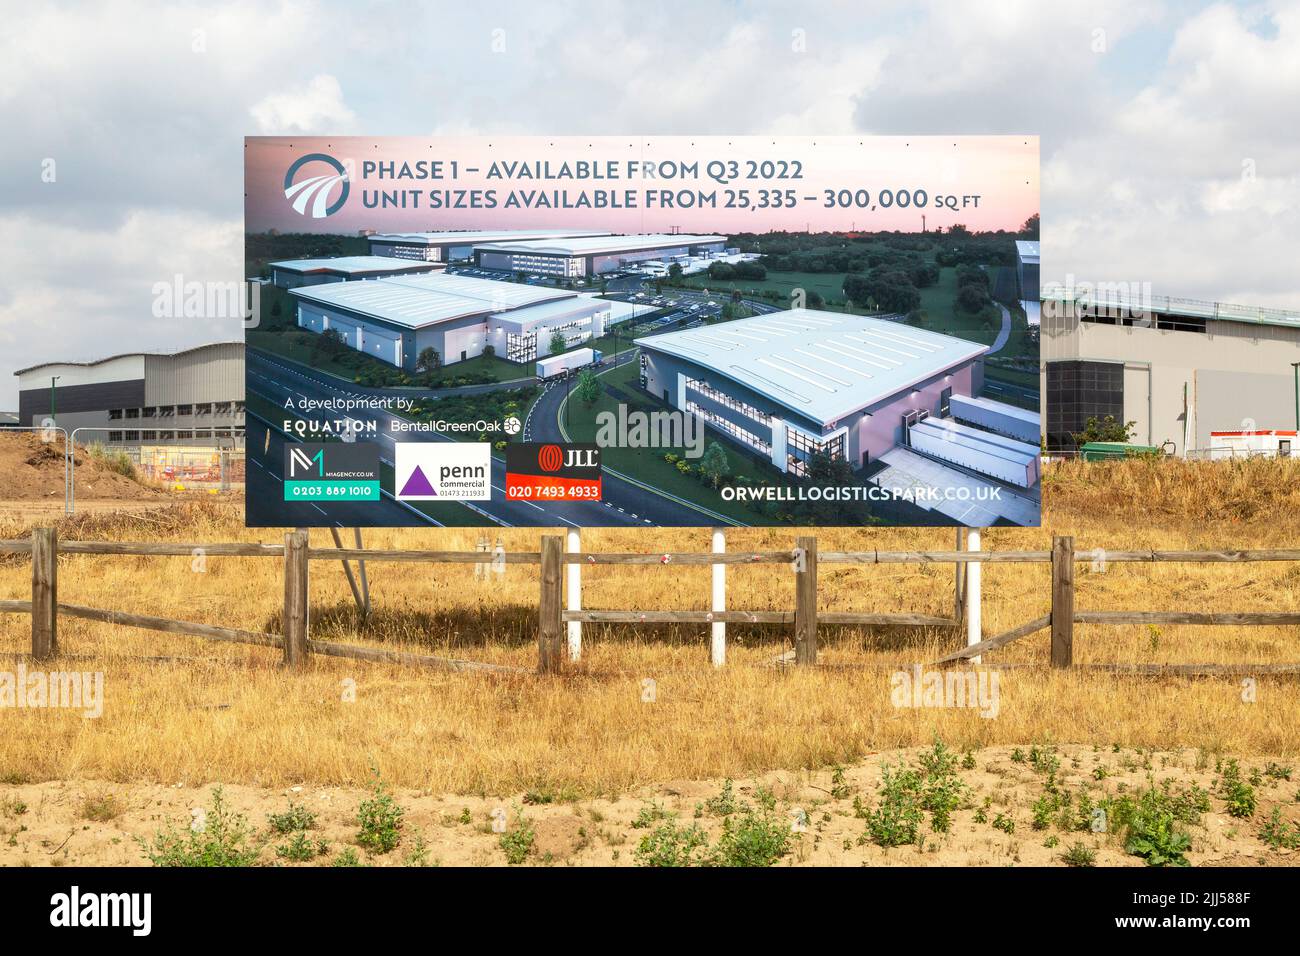 Estate agent billboard advertising sign for commercial property development, Orwell Logistics park for Felixstowe, Ipswich, Suffolk, England, UK July 2022 Stock Photo